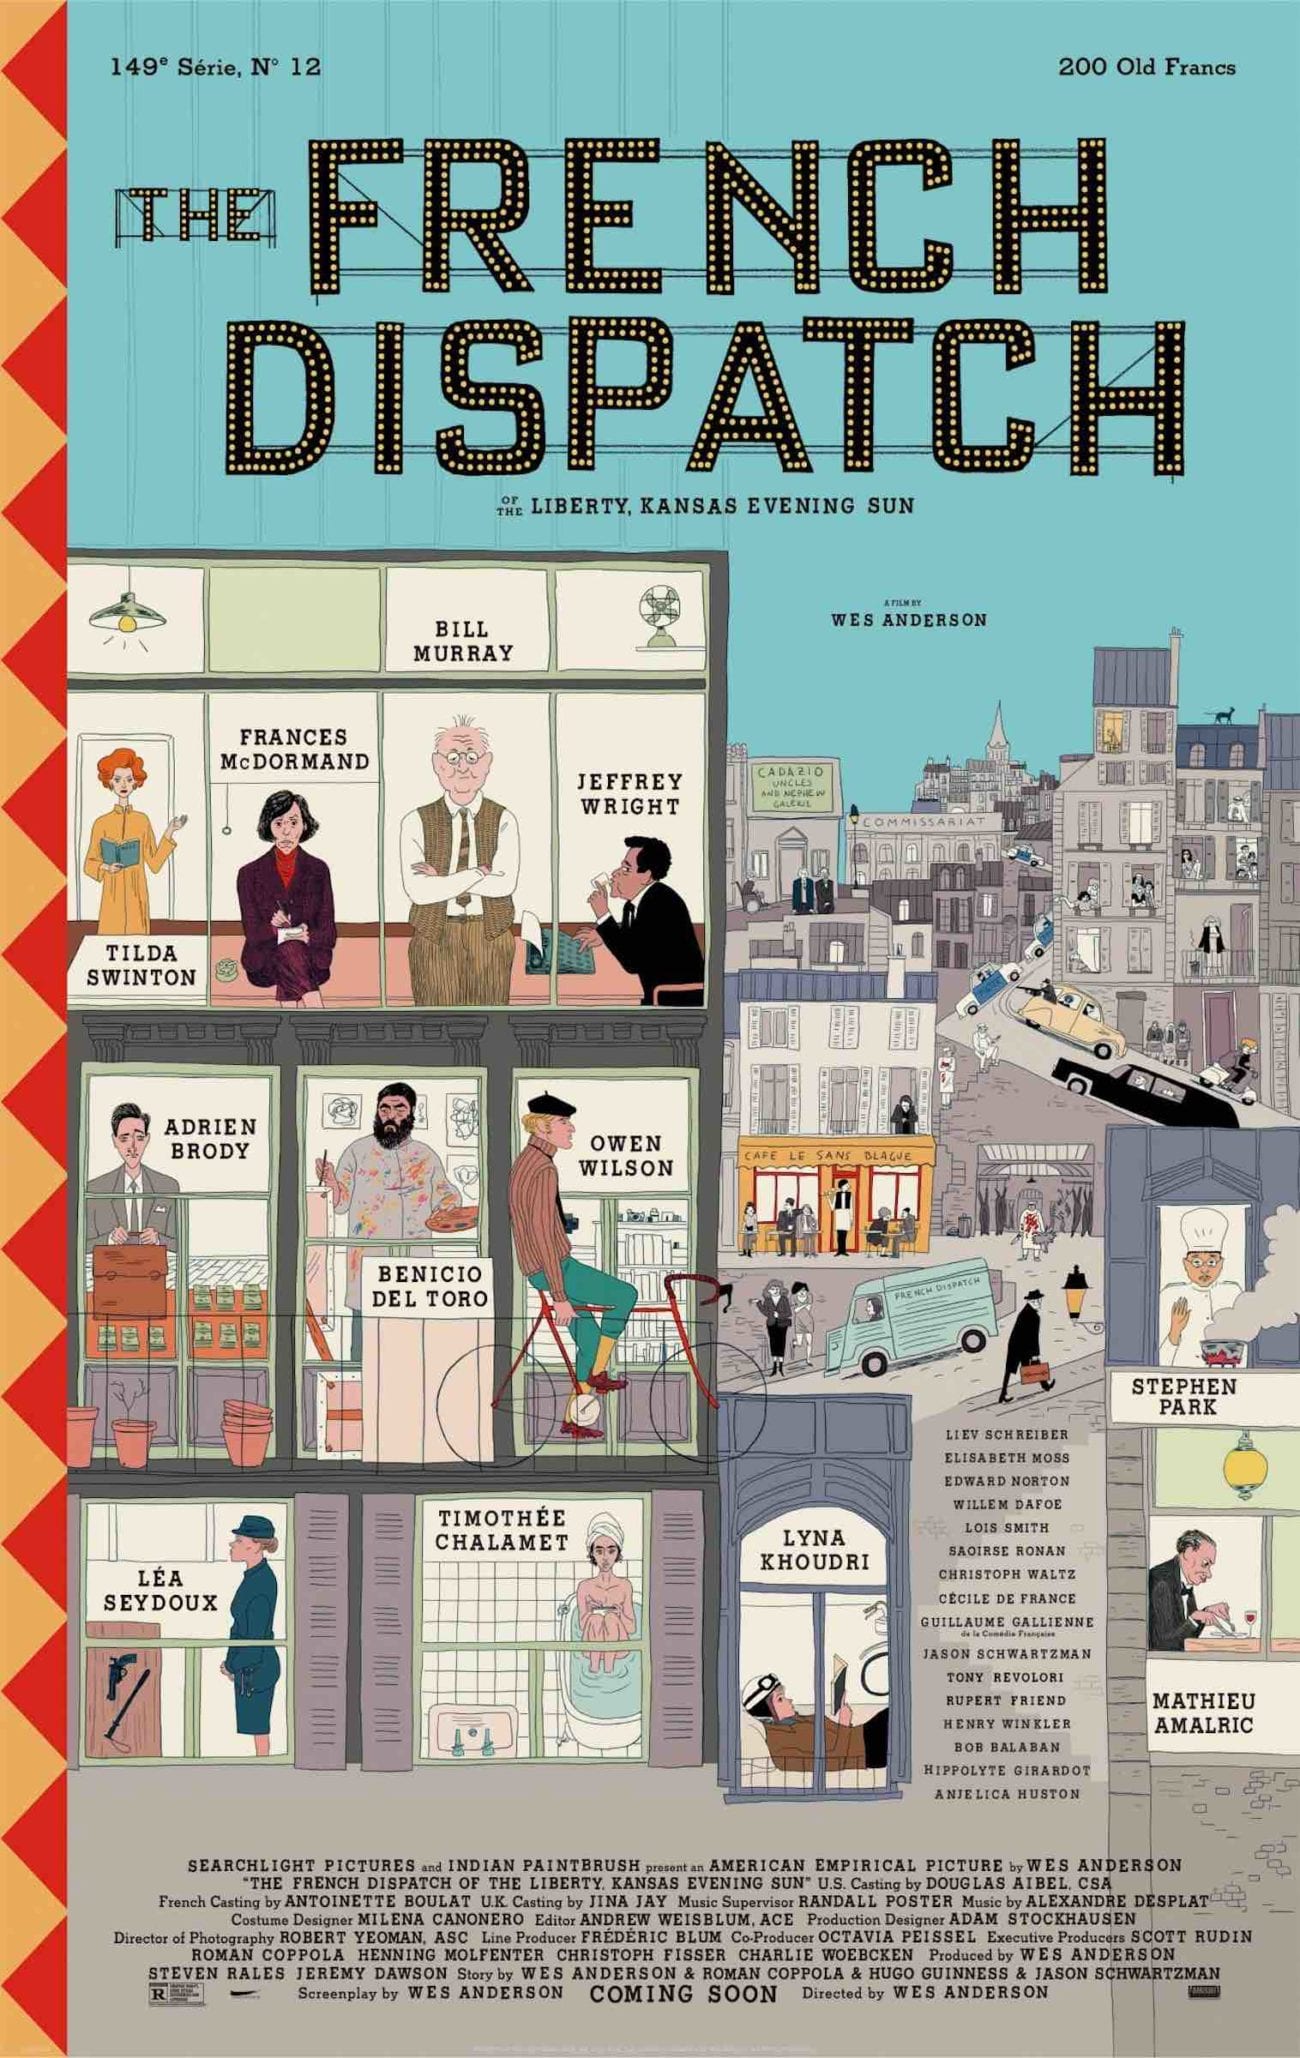 Wes Anderson may have outdone himself once again based on the first trailer for his new film, 'The French Dispatch'. Here's what we know.